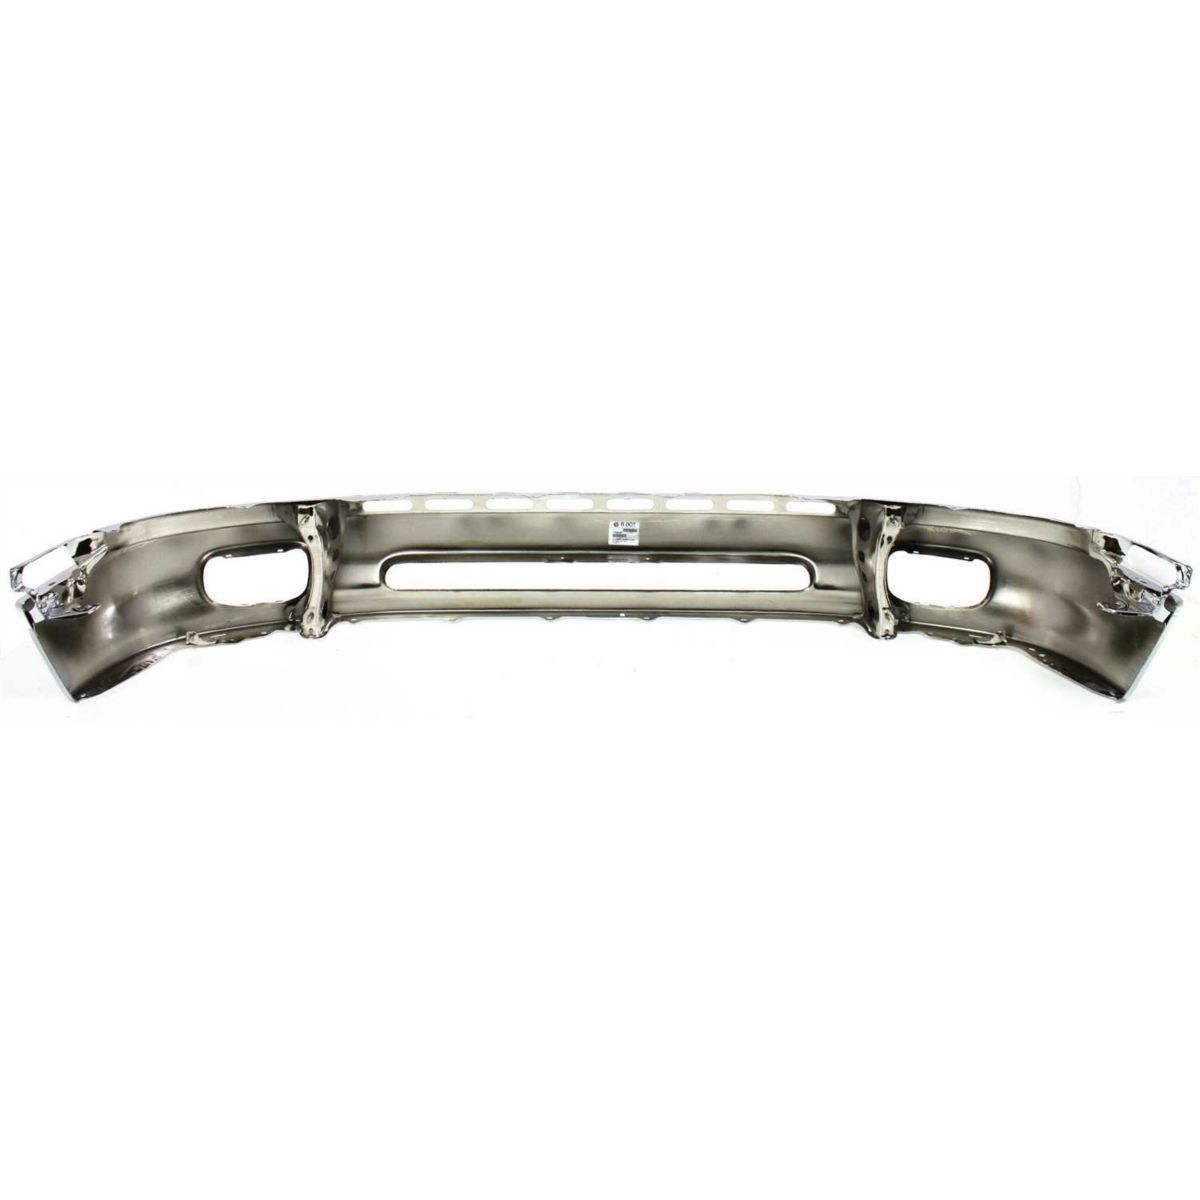 Toyota Tundra 2000 - 2006 Front Chrome Bumper 00 - 06 TO1002170 Bumper-King